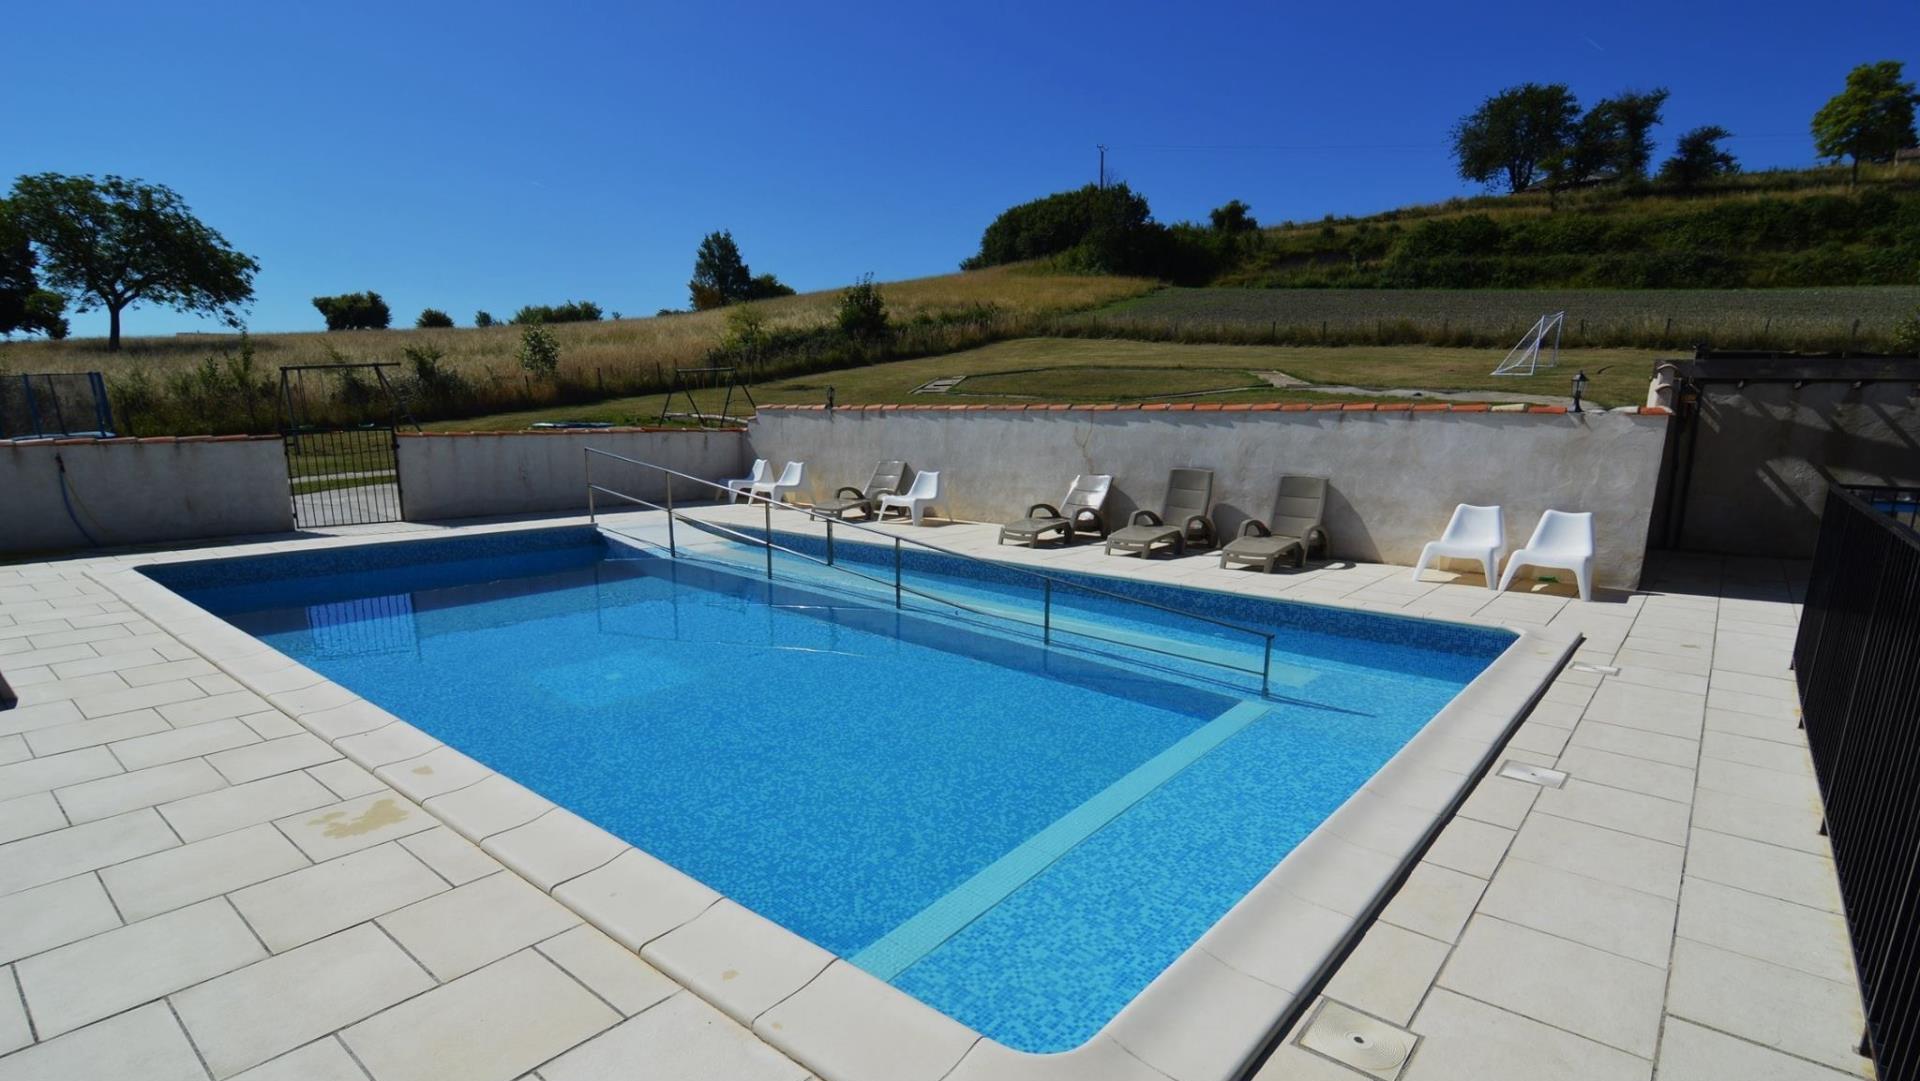 Picture of Domaine du Sourire - Wheelchair accessible stunning swimming pool